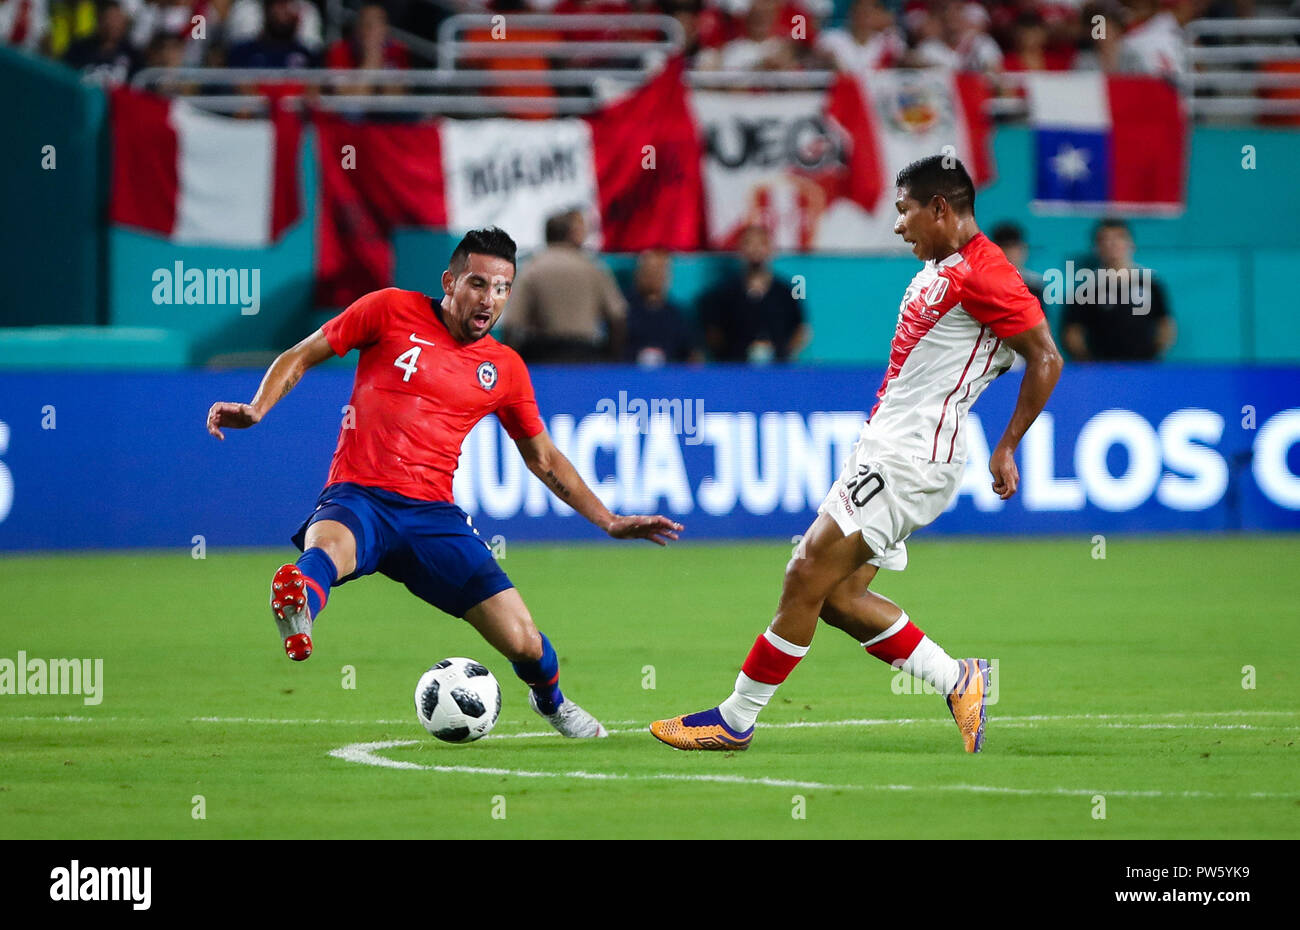 Miami Gardens, Florida, USA. 12th Oct, 2018. Chile defender MAURICIO ISLA (4) goes for the ball against Peru midfielder EDISON FLORES (20) during an international friendly match between the Peru and Chile national soccer teams, at the Hard Rock Stadium in Miami Gardens, Florida. Credit: Mario Houben/ZUMA Wire/Alamy Live News Stock Photo